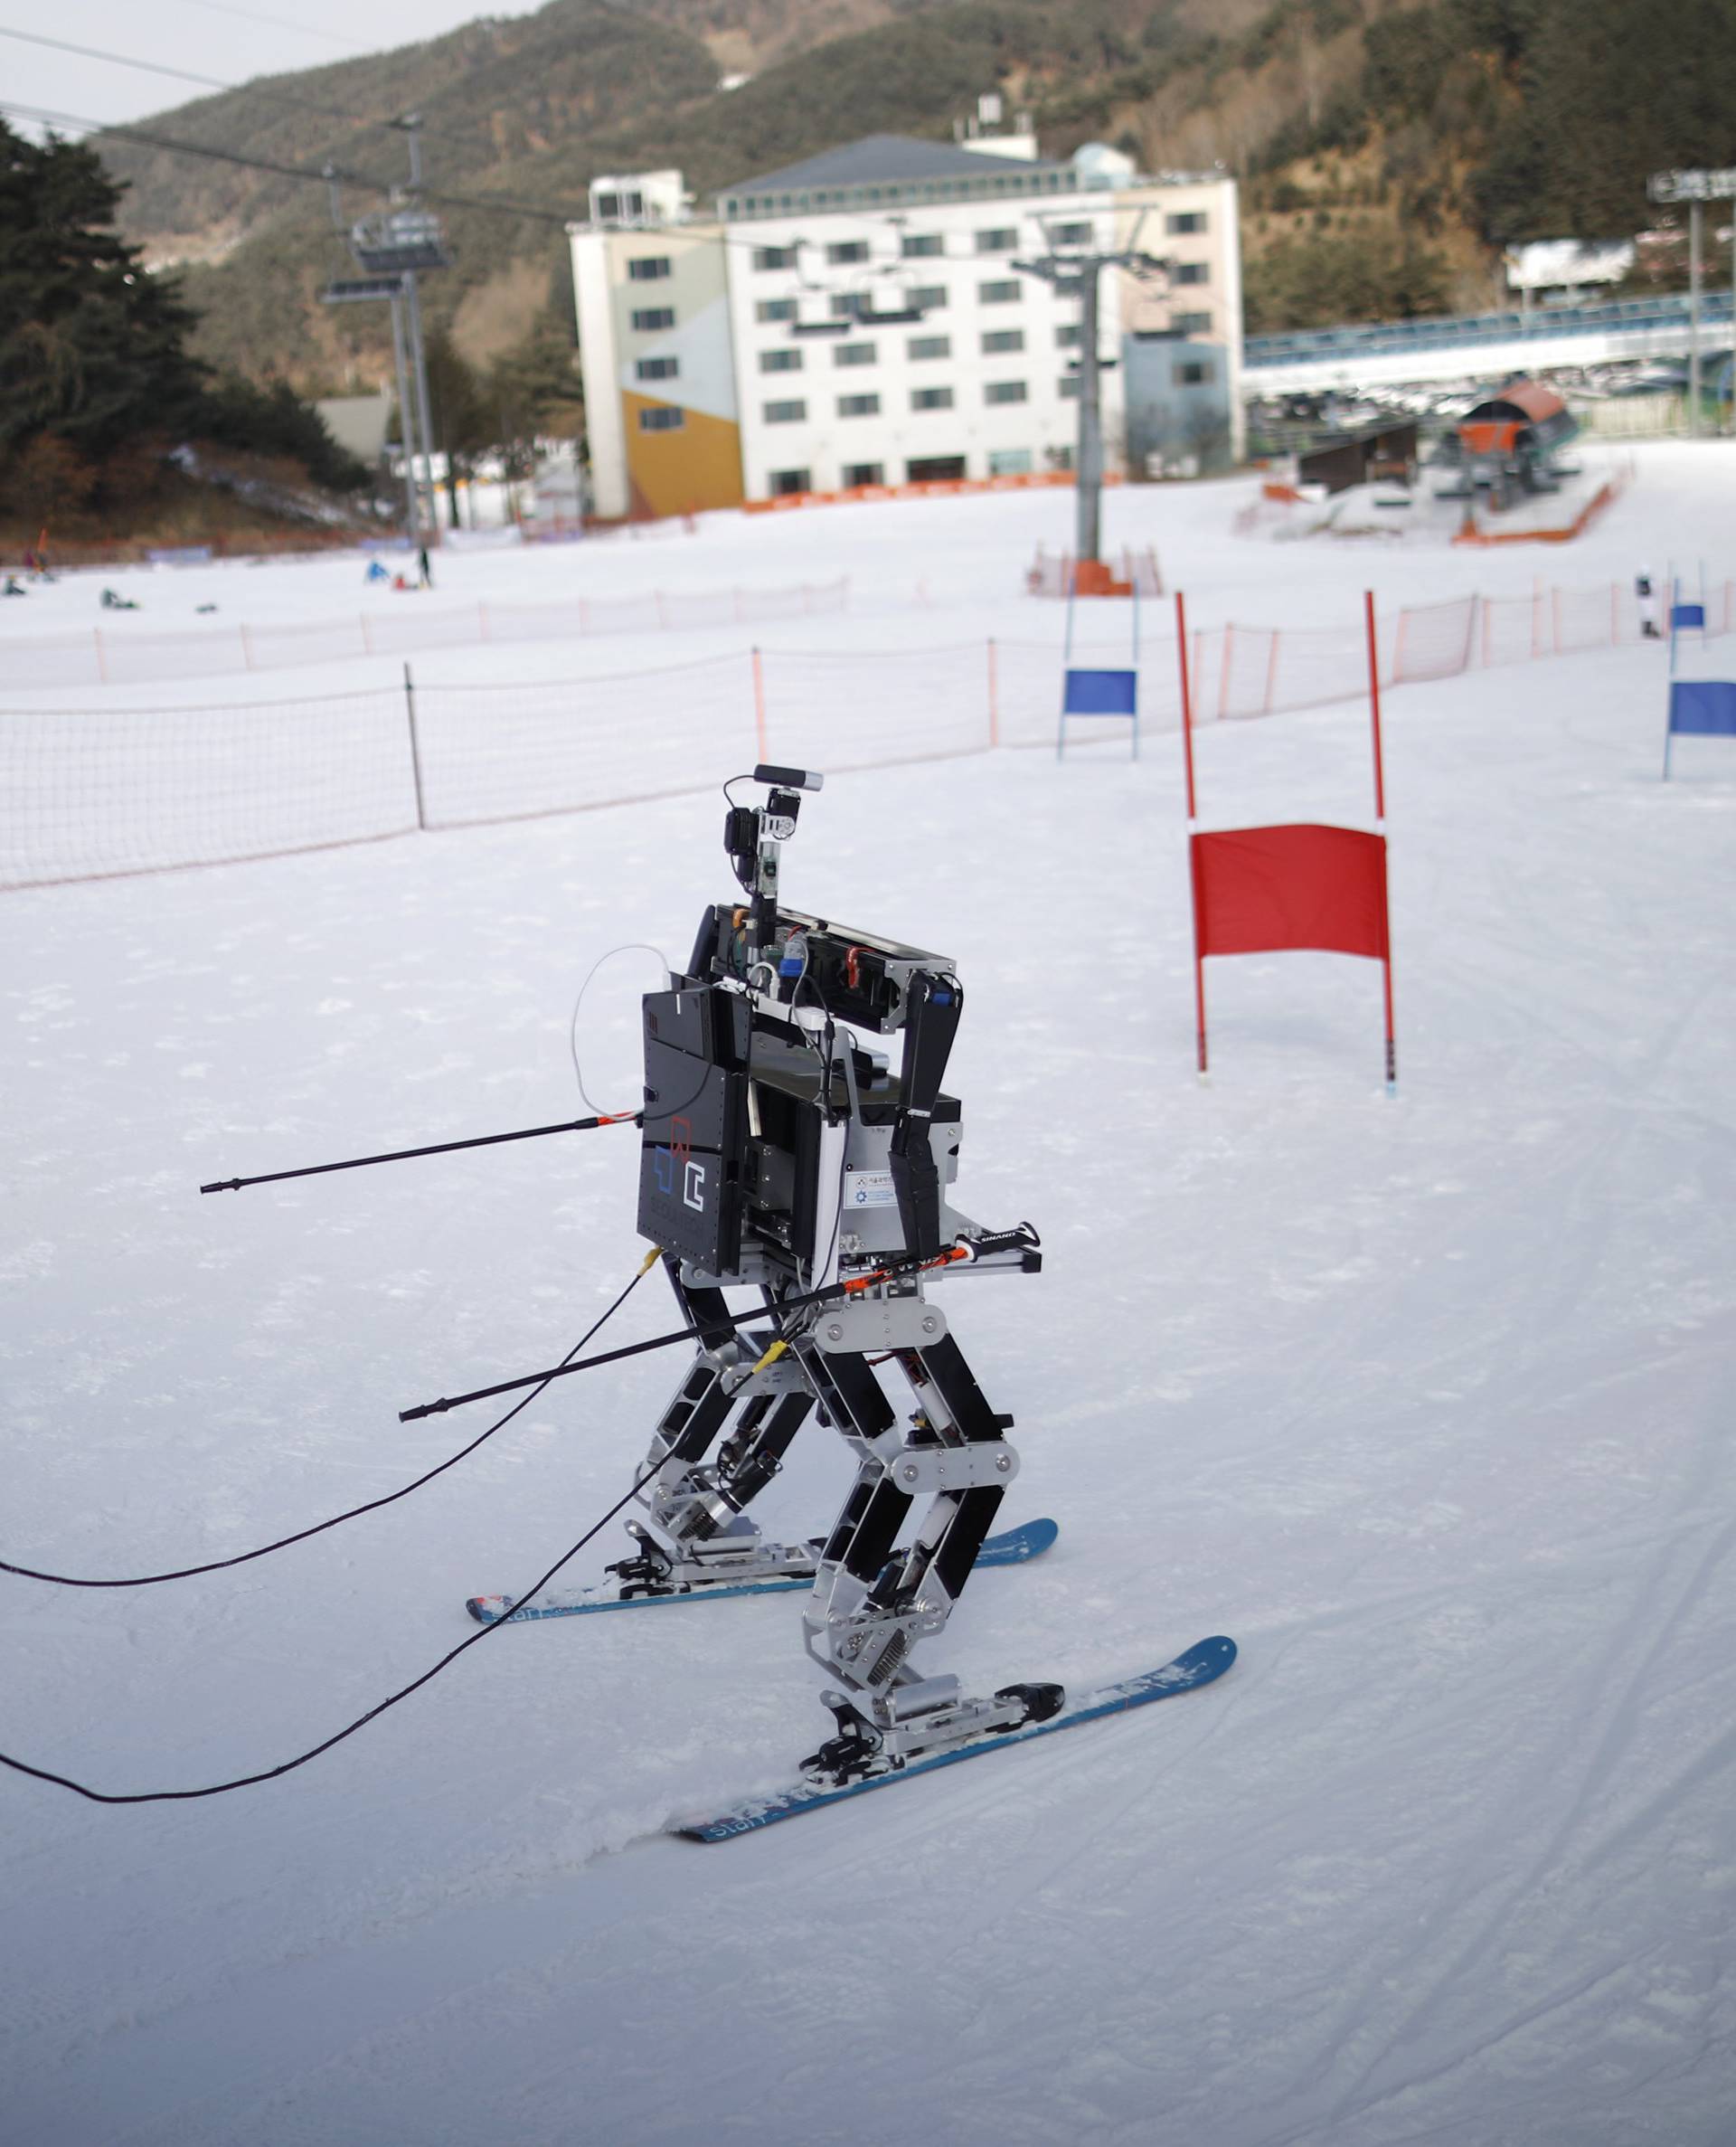 A robot skis during practice at the Ski Robot Challenge at a ski resort in Hoenseong